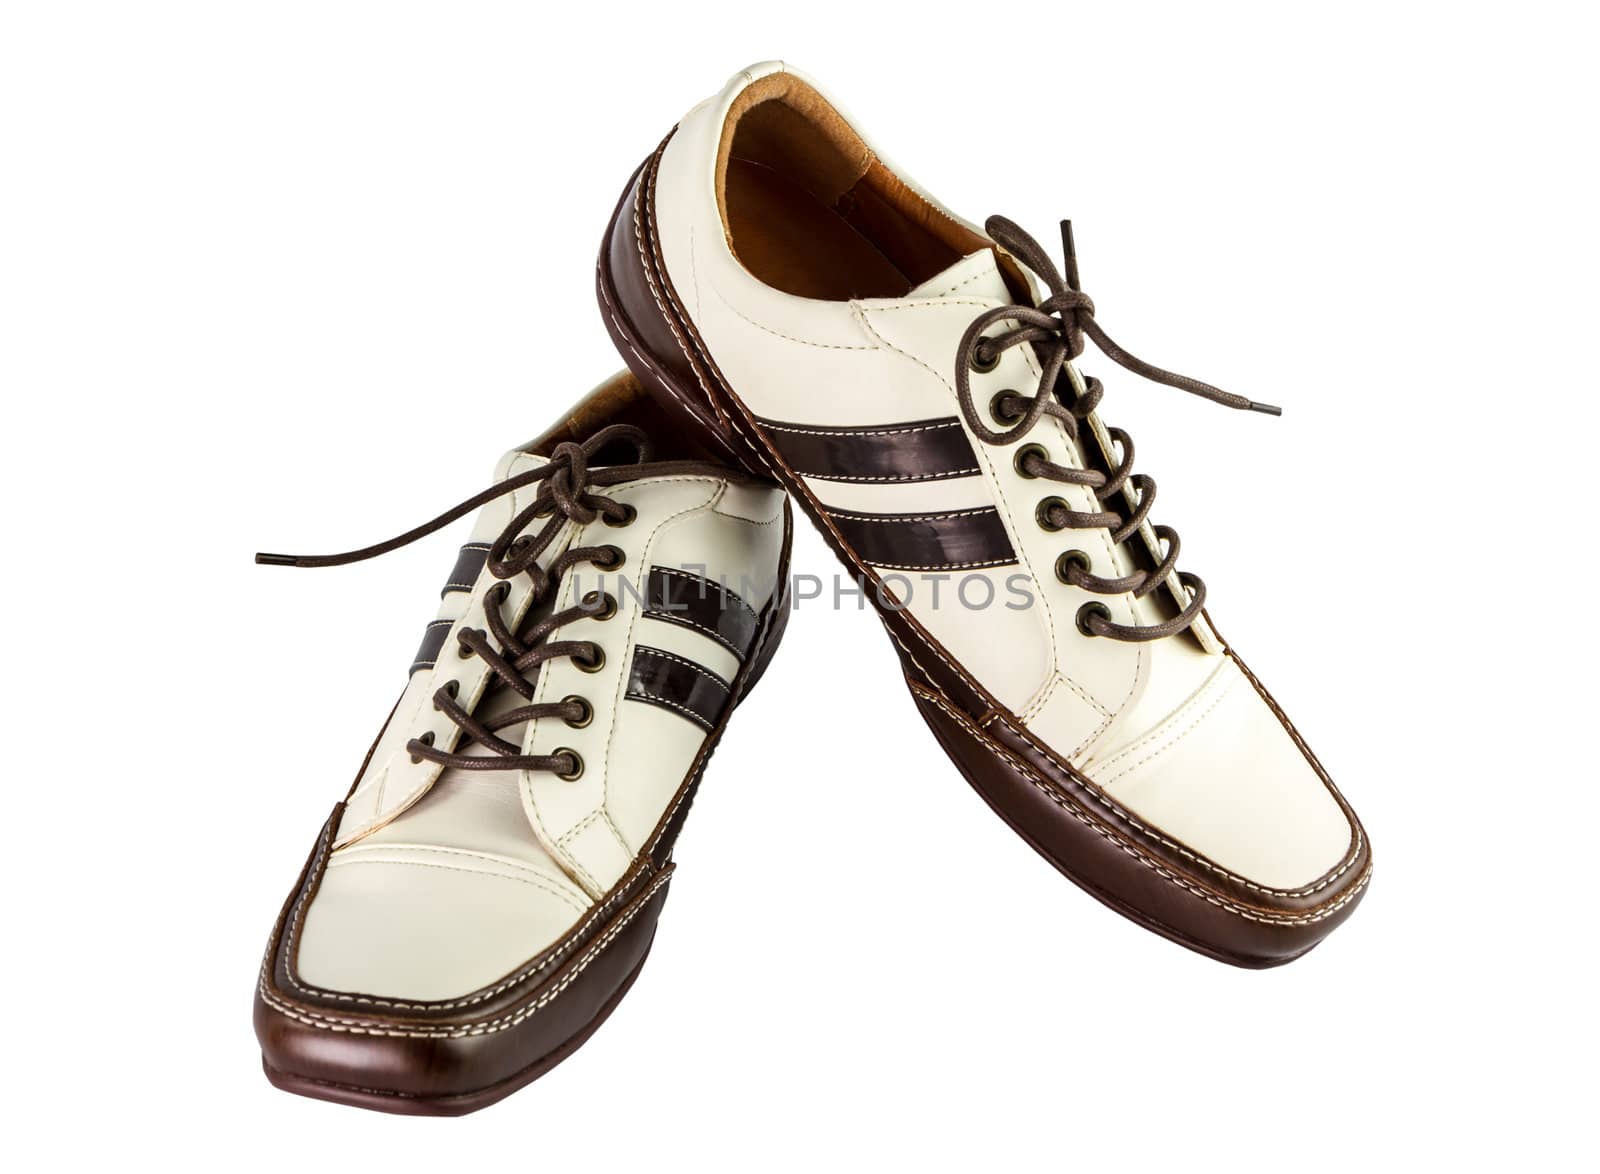 Brown and white modern leather shoe